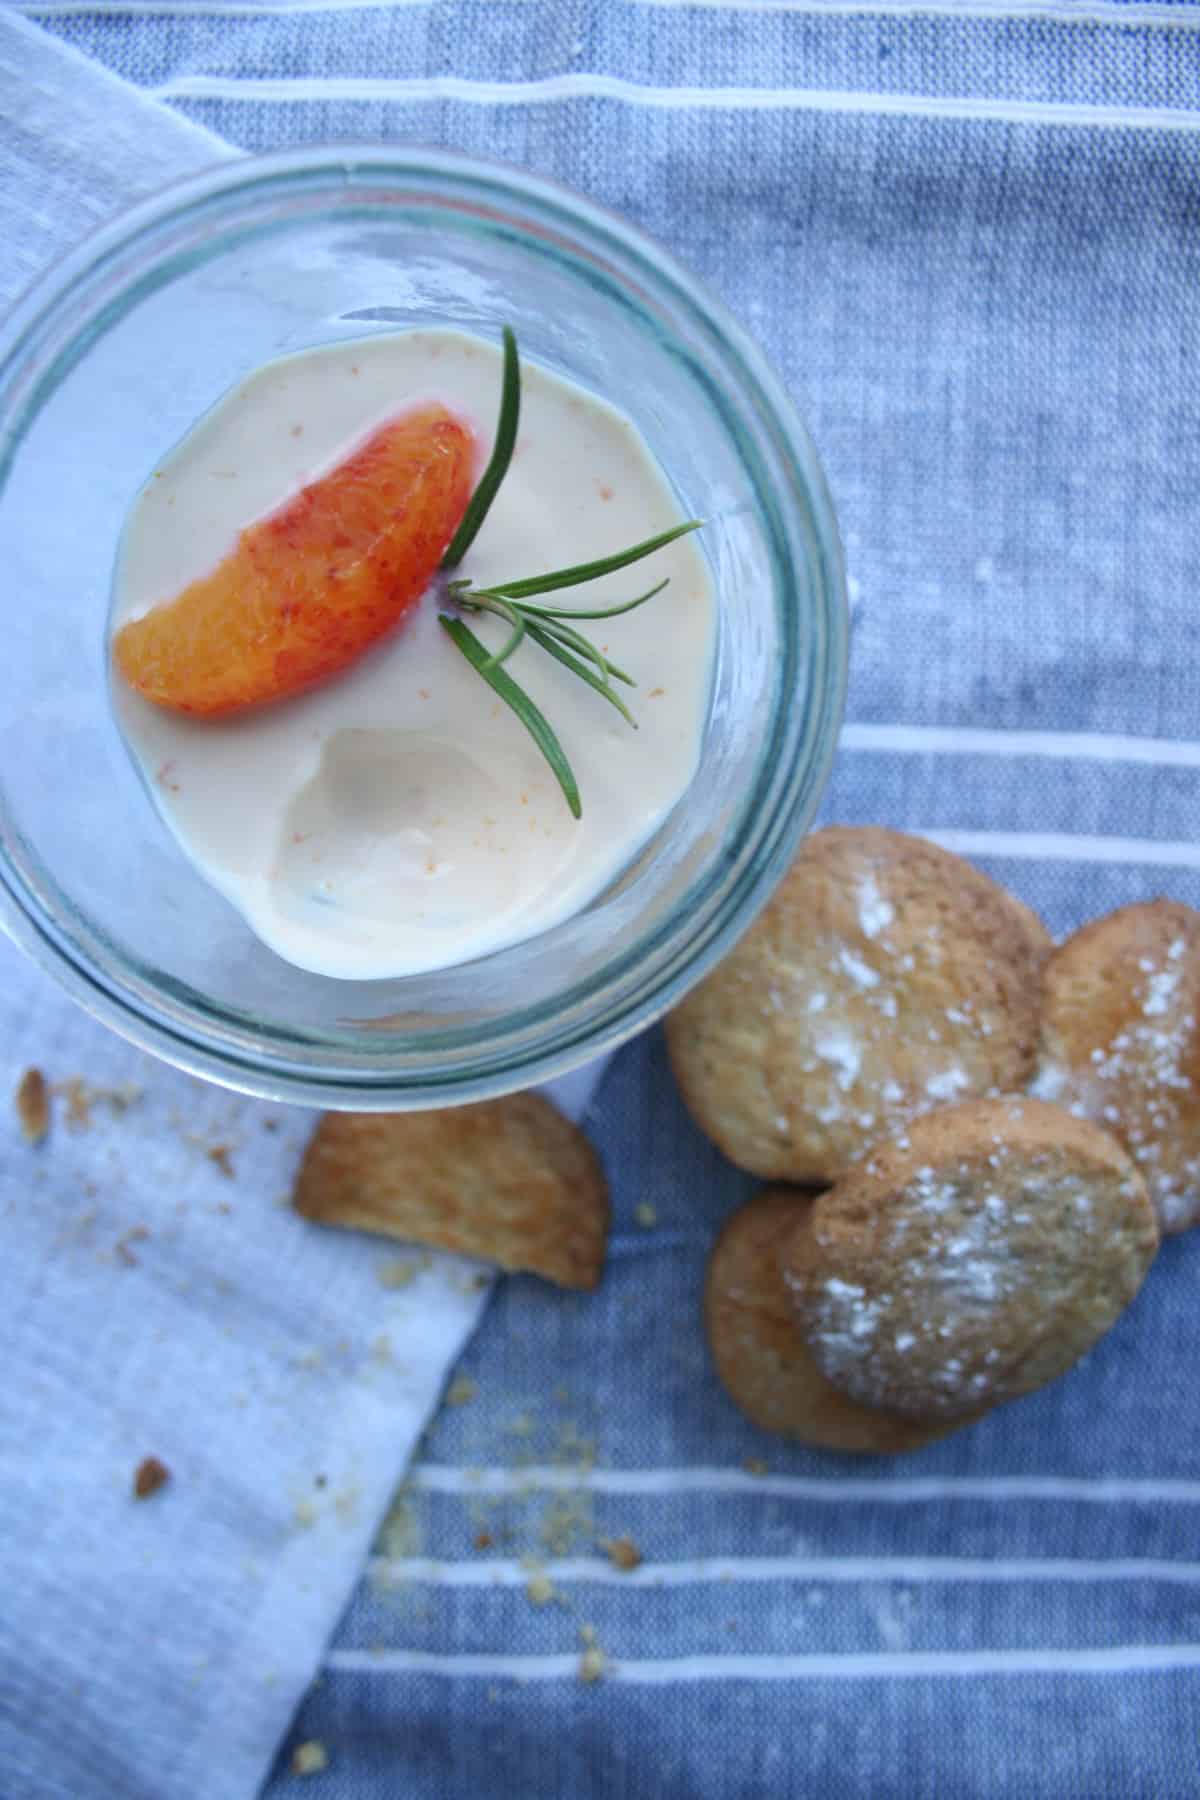 Blood Orange Posset with Blood Orange and Rosemary Biscuits - a simple but elegant dessert to make use of this beautiful winter fruit | eatloveeats.com